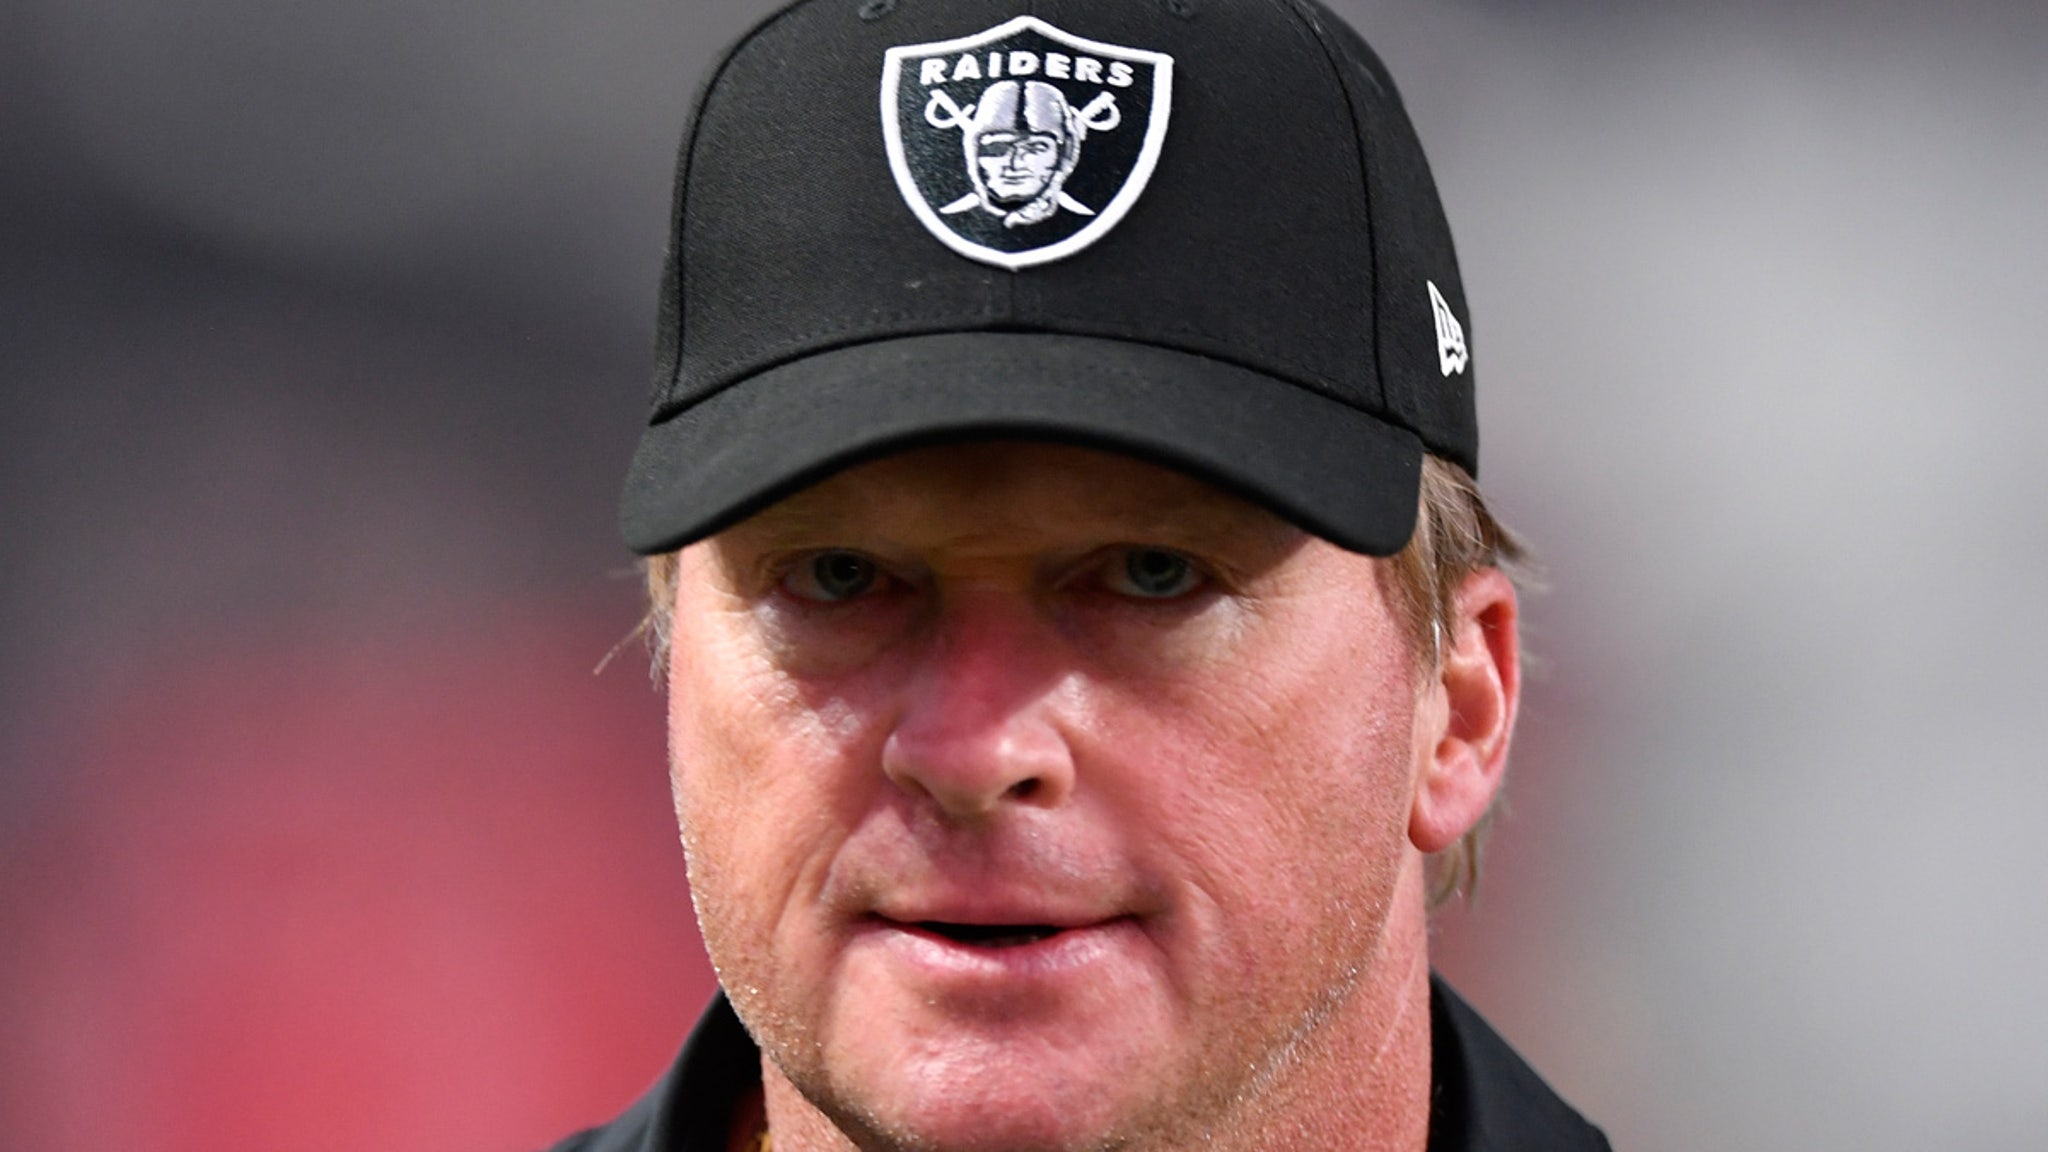 Jon Gruden Out As Raiders Coach After Reported Homophobic Slurs In Emails